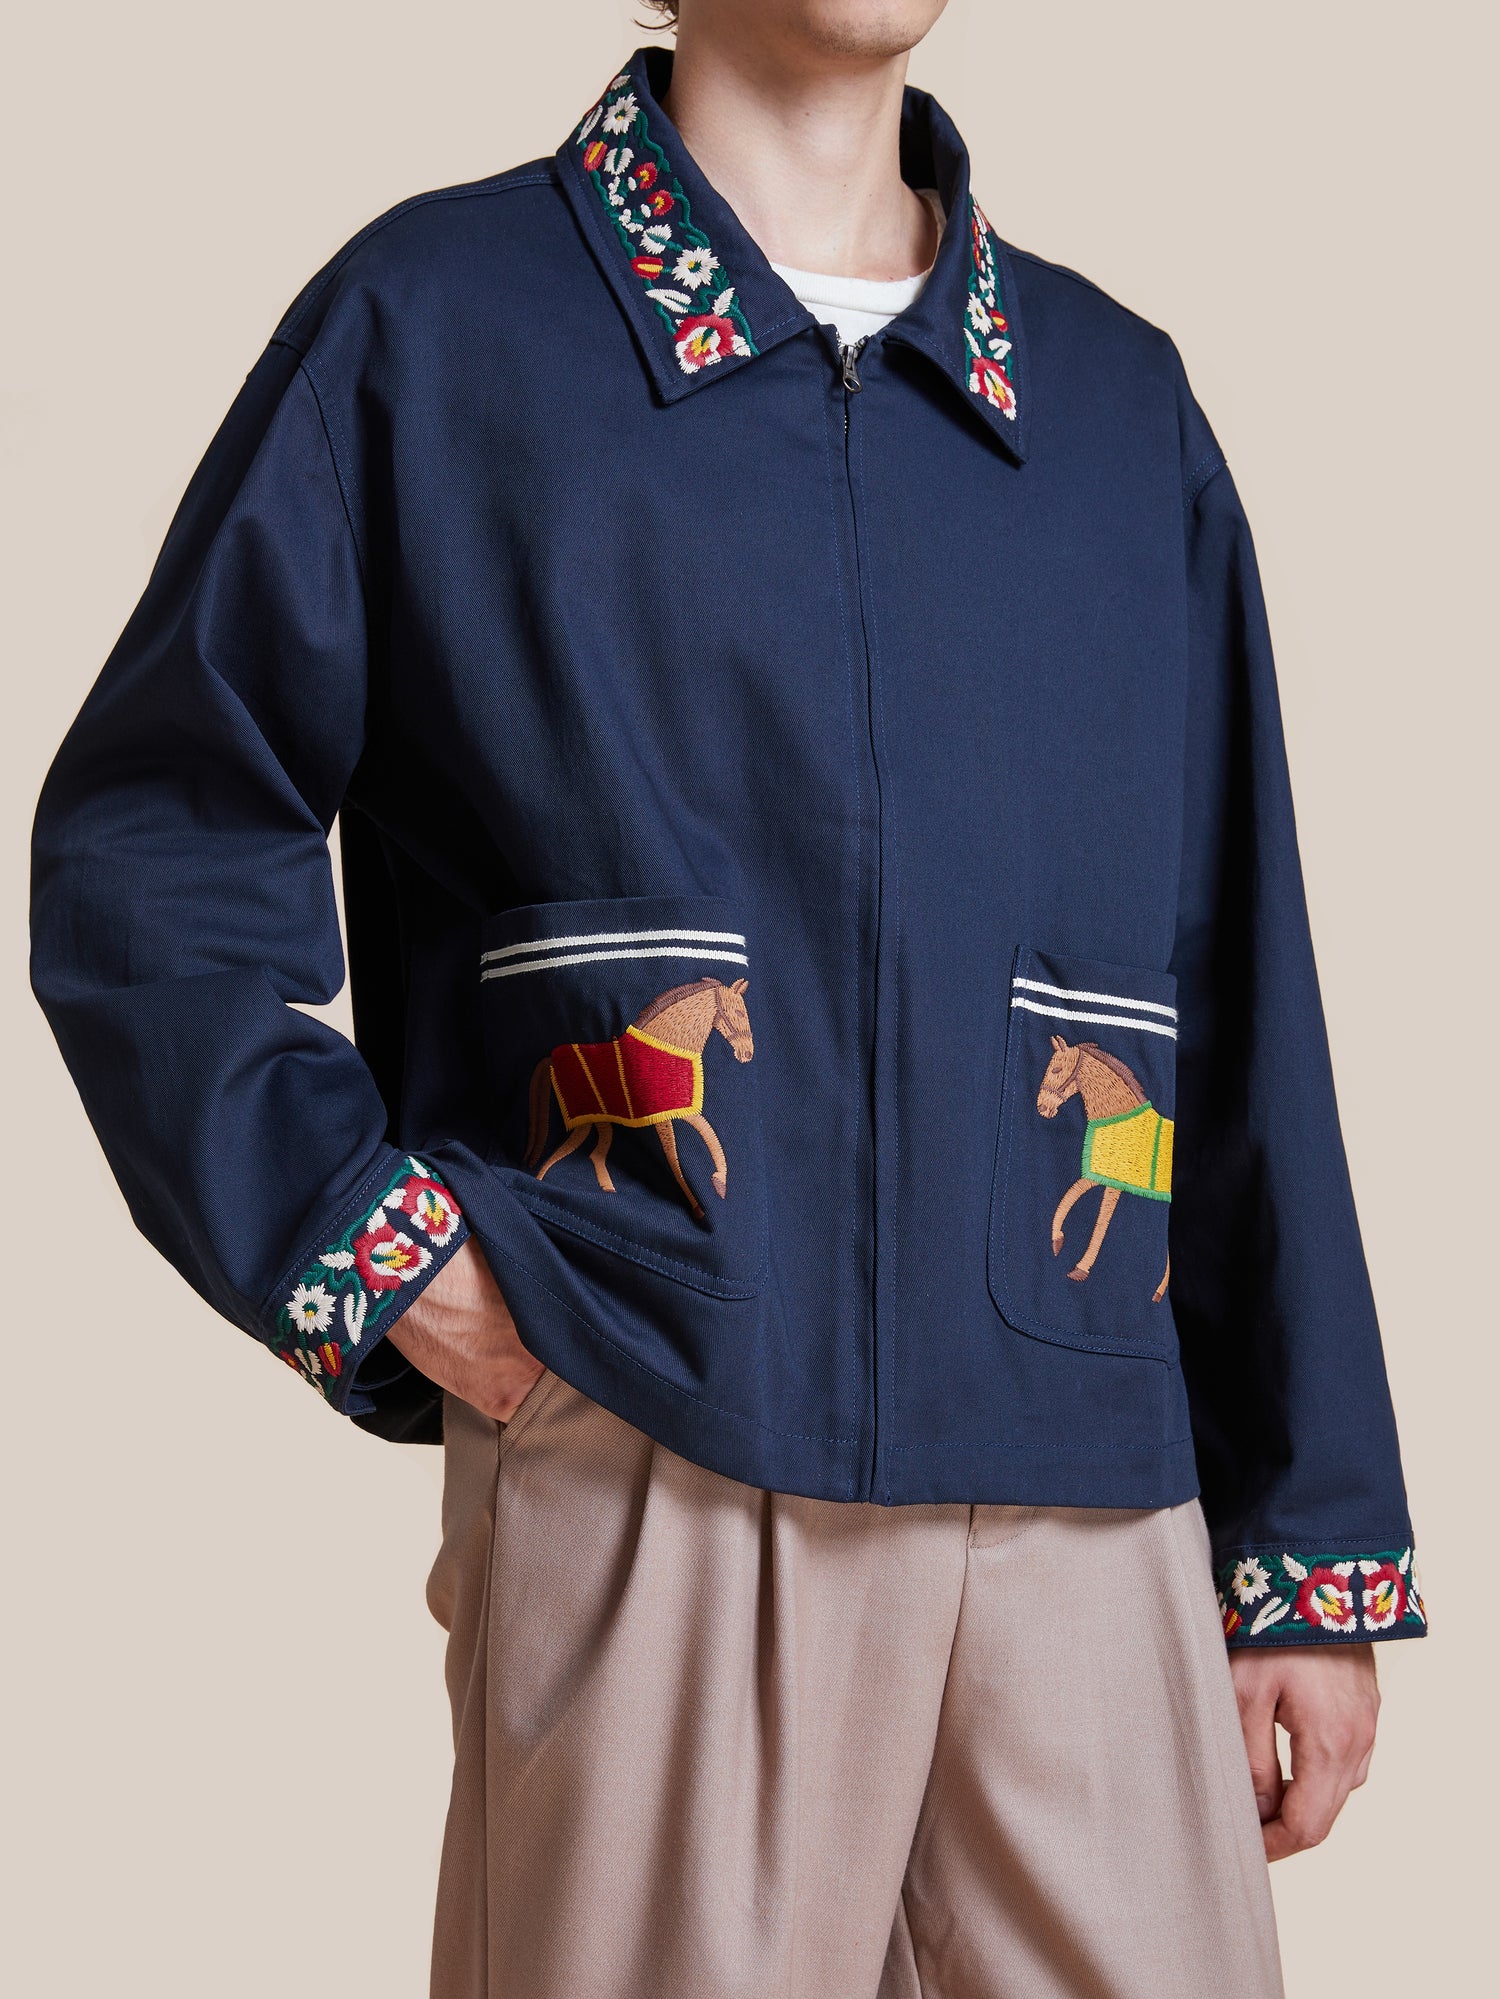 Man wearing a dark blue Found Horse Equine Work Jacket with detailed embroidery on the sleeves and floral patterns on the collar and cuffs, paired with light brown trousers.